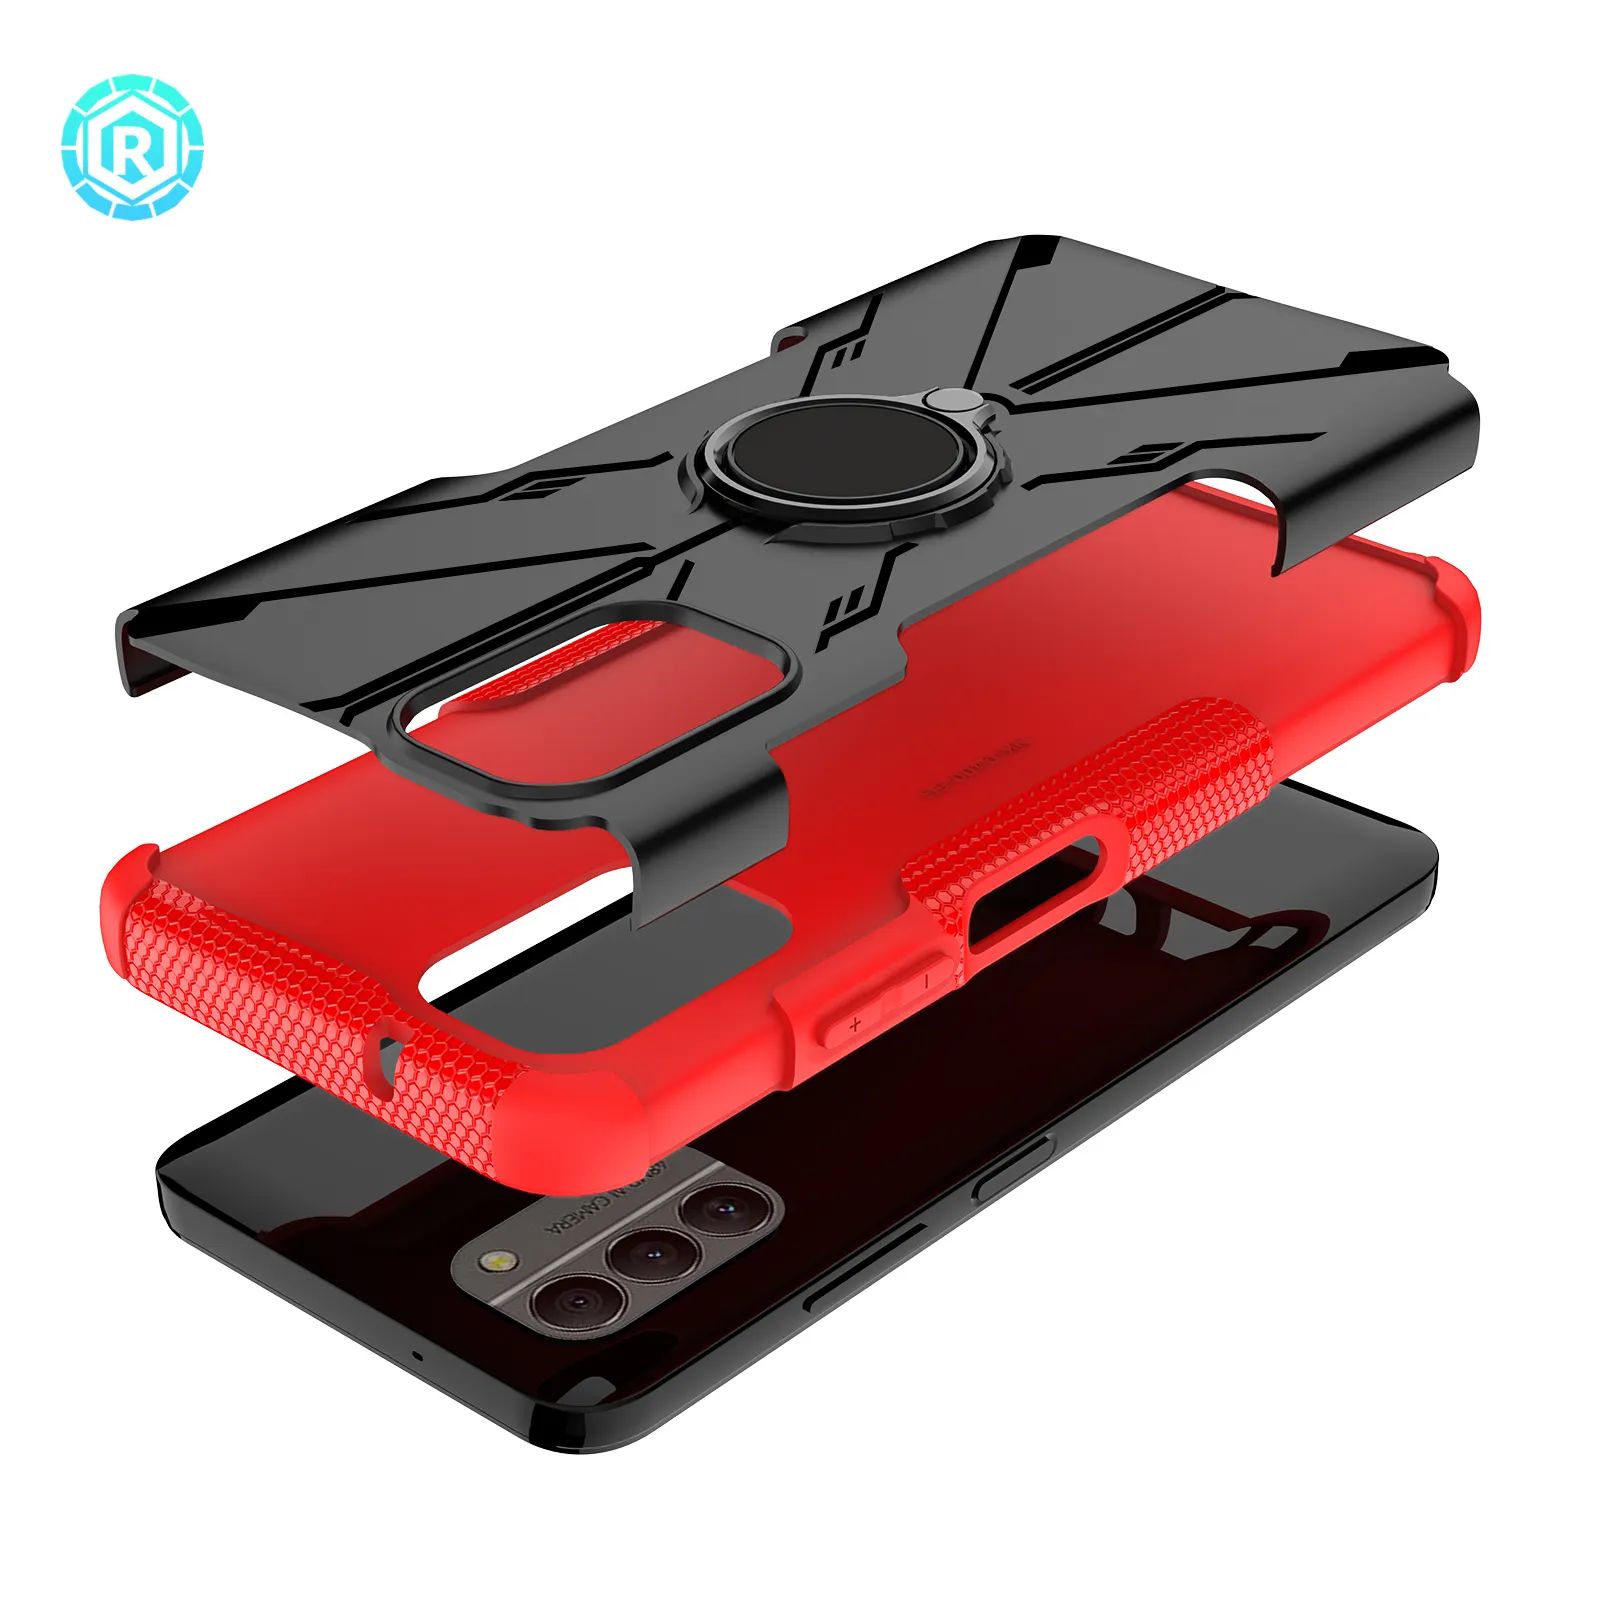 Roiskin Wholesale Price Flexible Kickstand Waterproof Fireproof 8 Colors Available Mecha Phone Case For Nokia G400 5G Cover